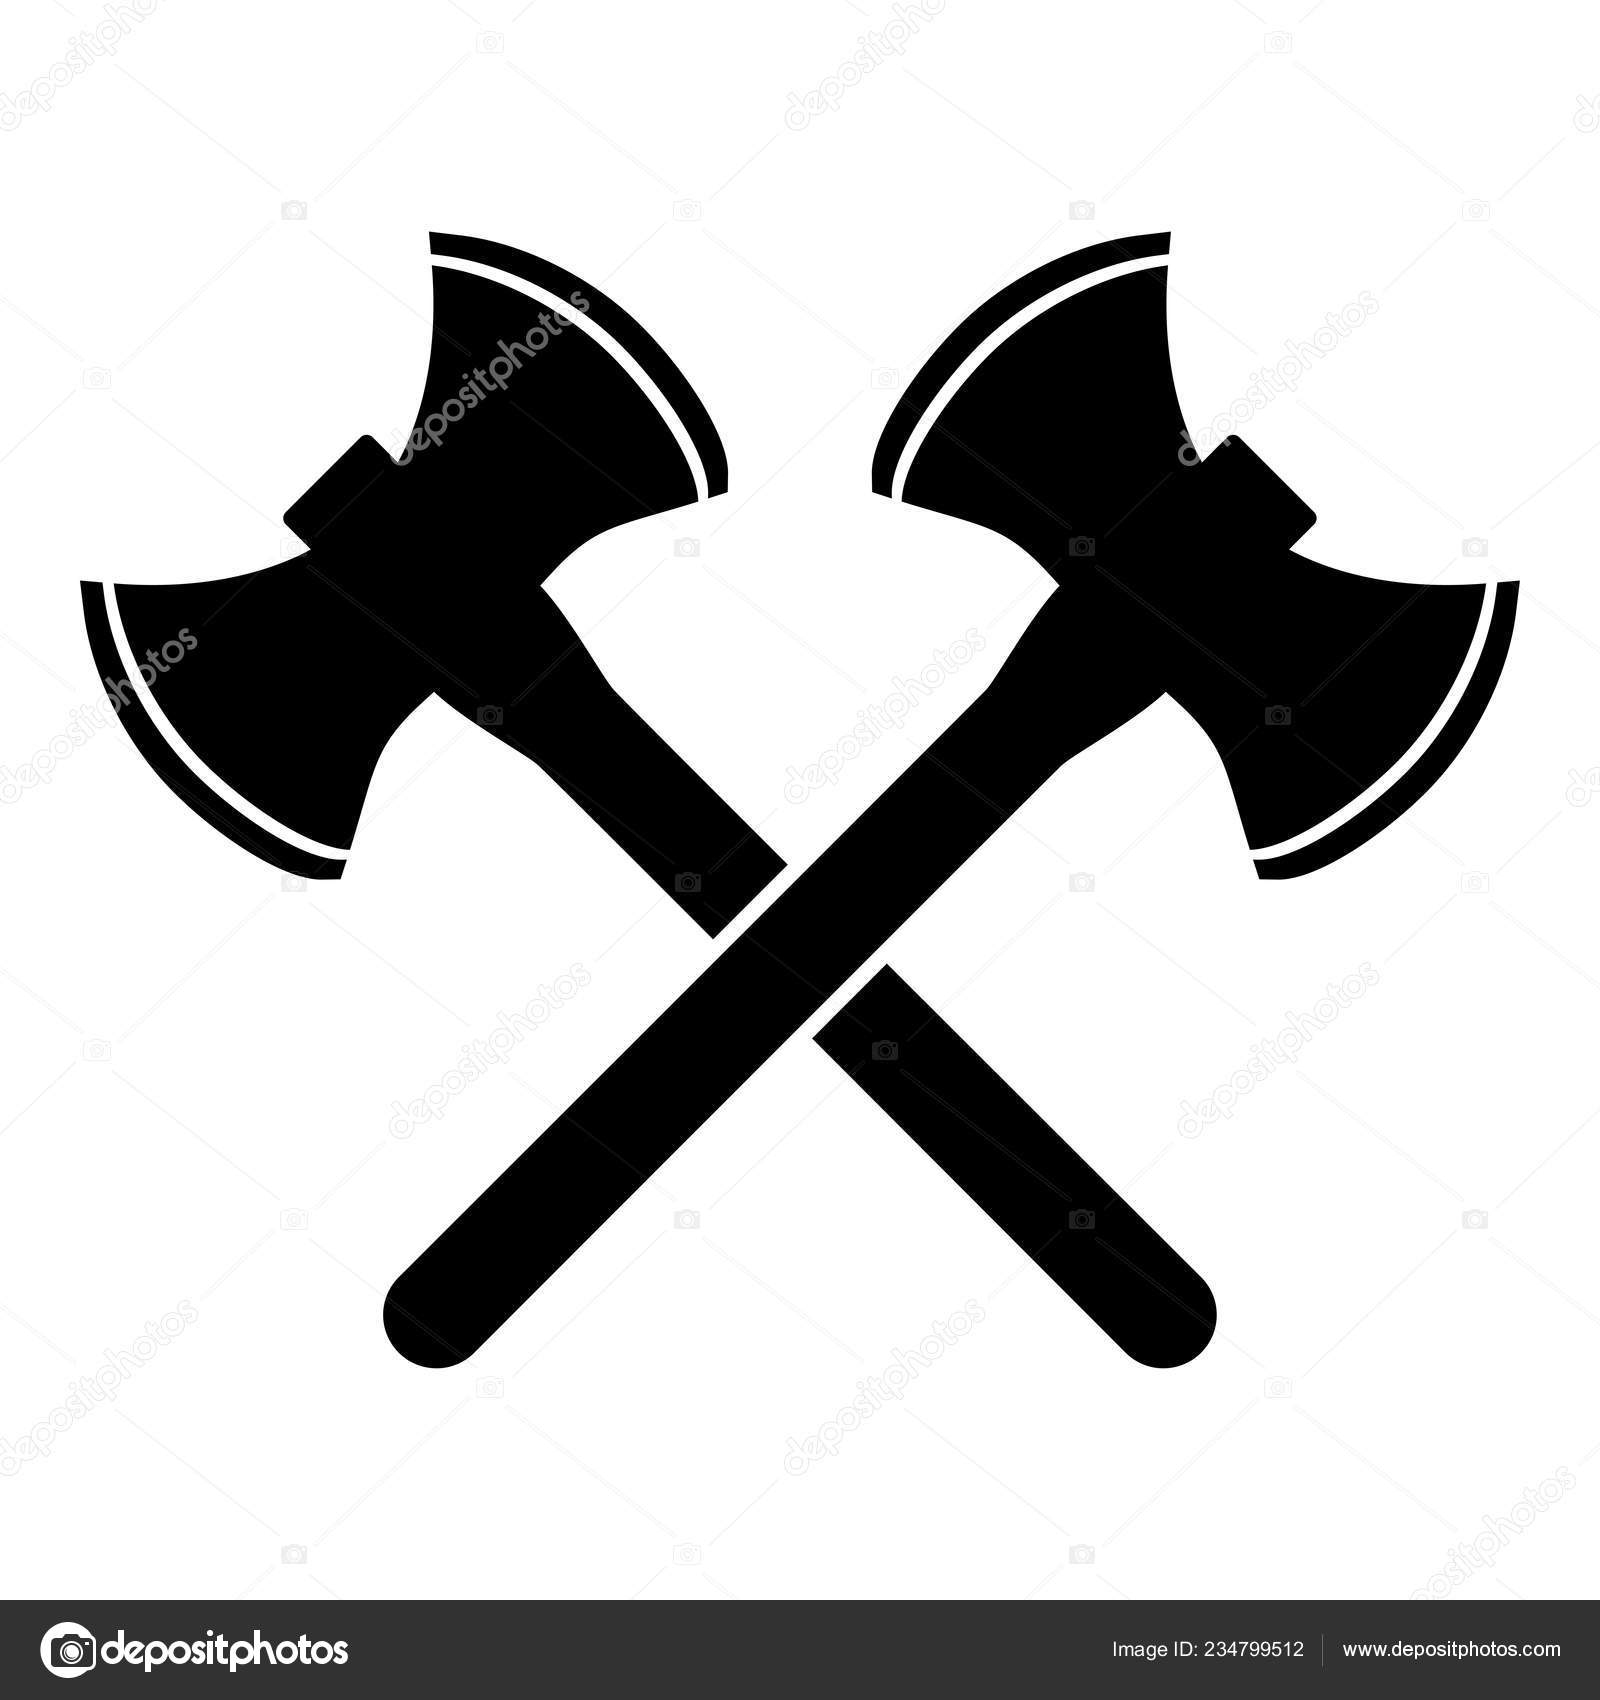 Viking with two axes, black background, ready to fight, logo, wa 